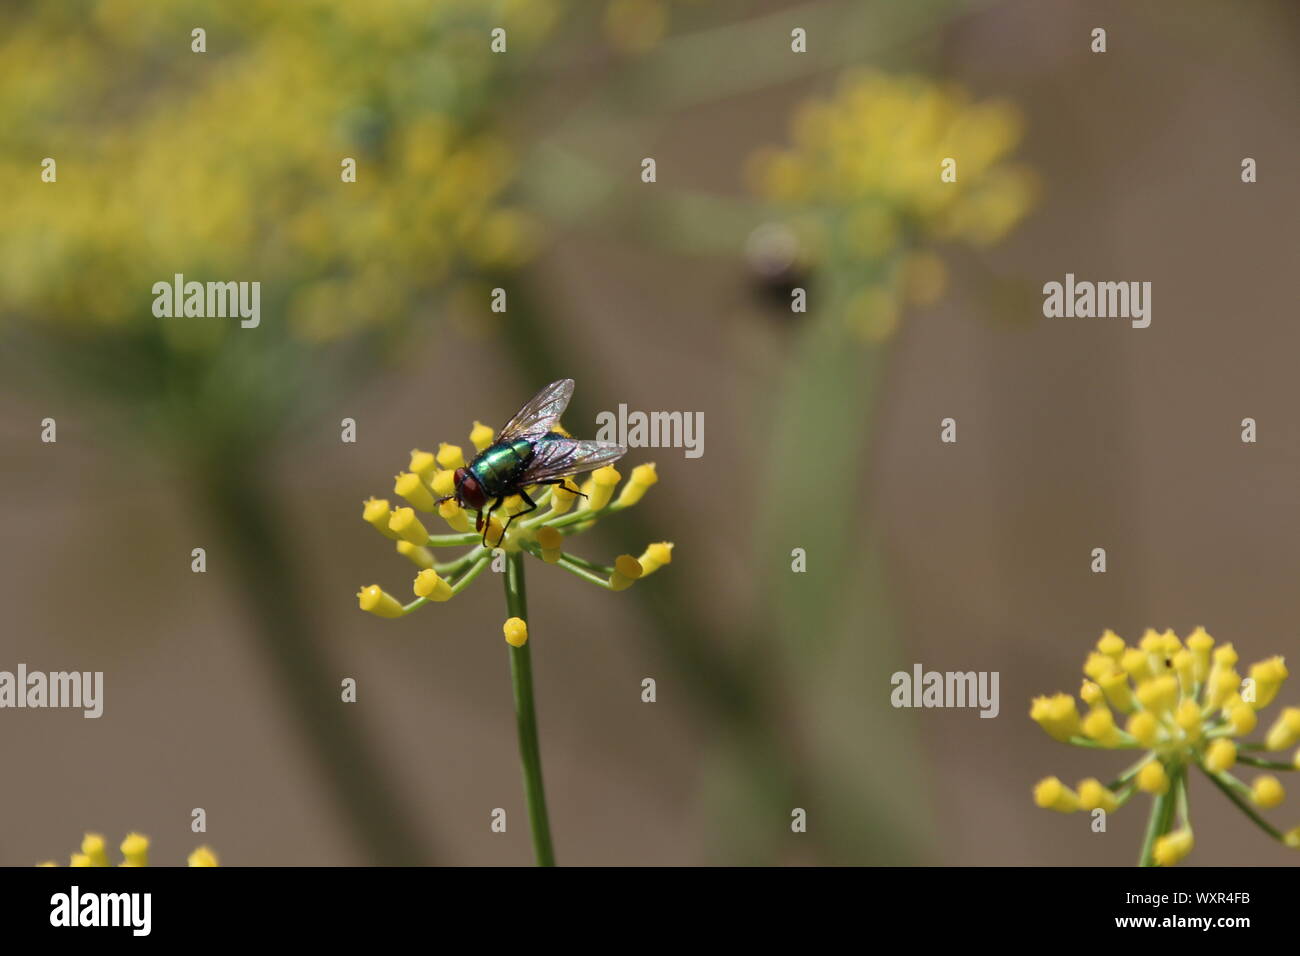 A fly in top of a fennel flower Stock Photo